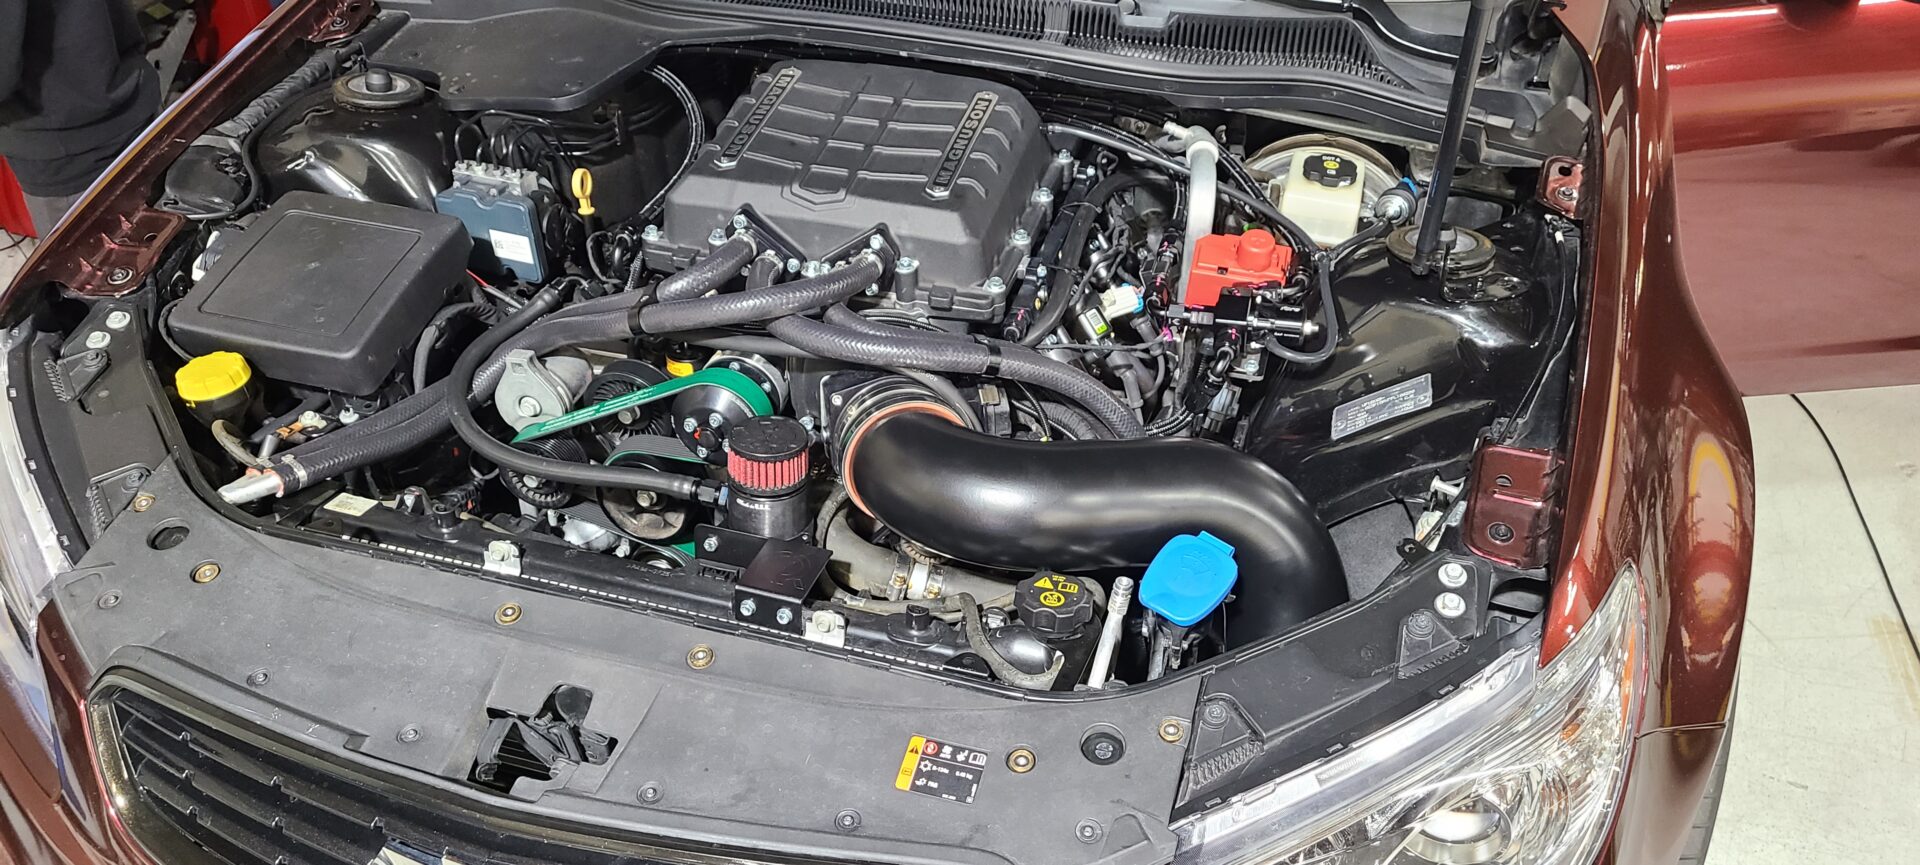 An open car engine with black parts